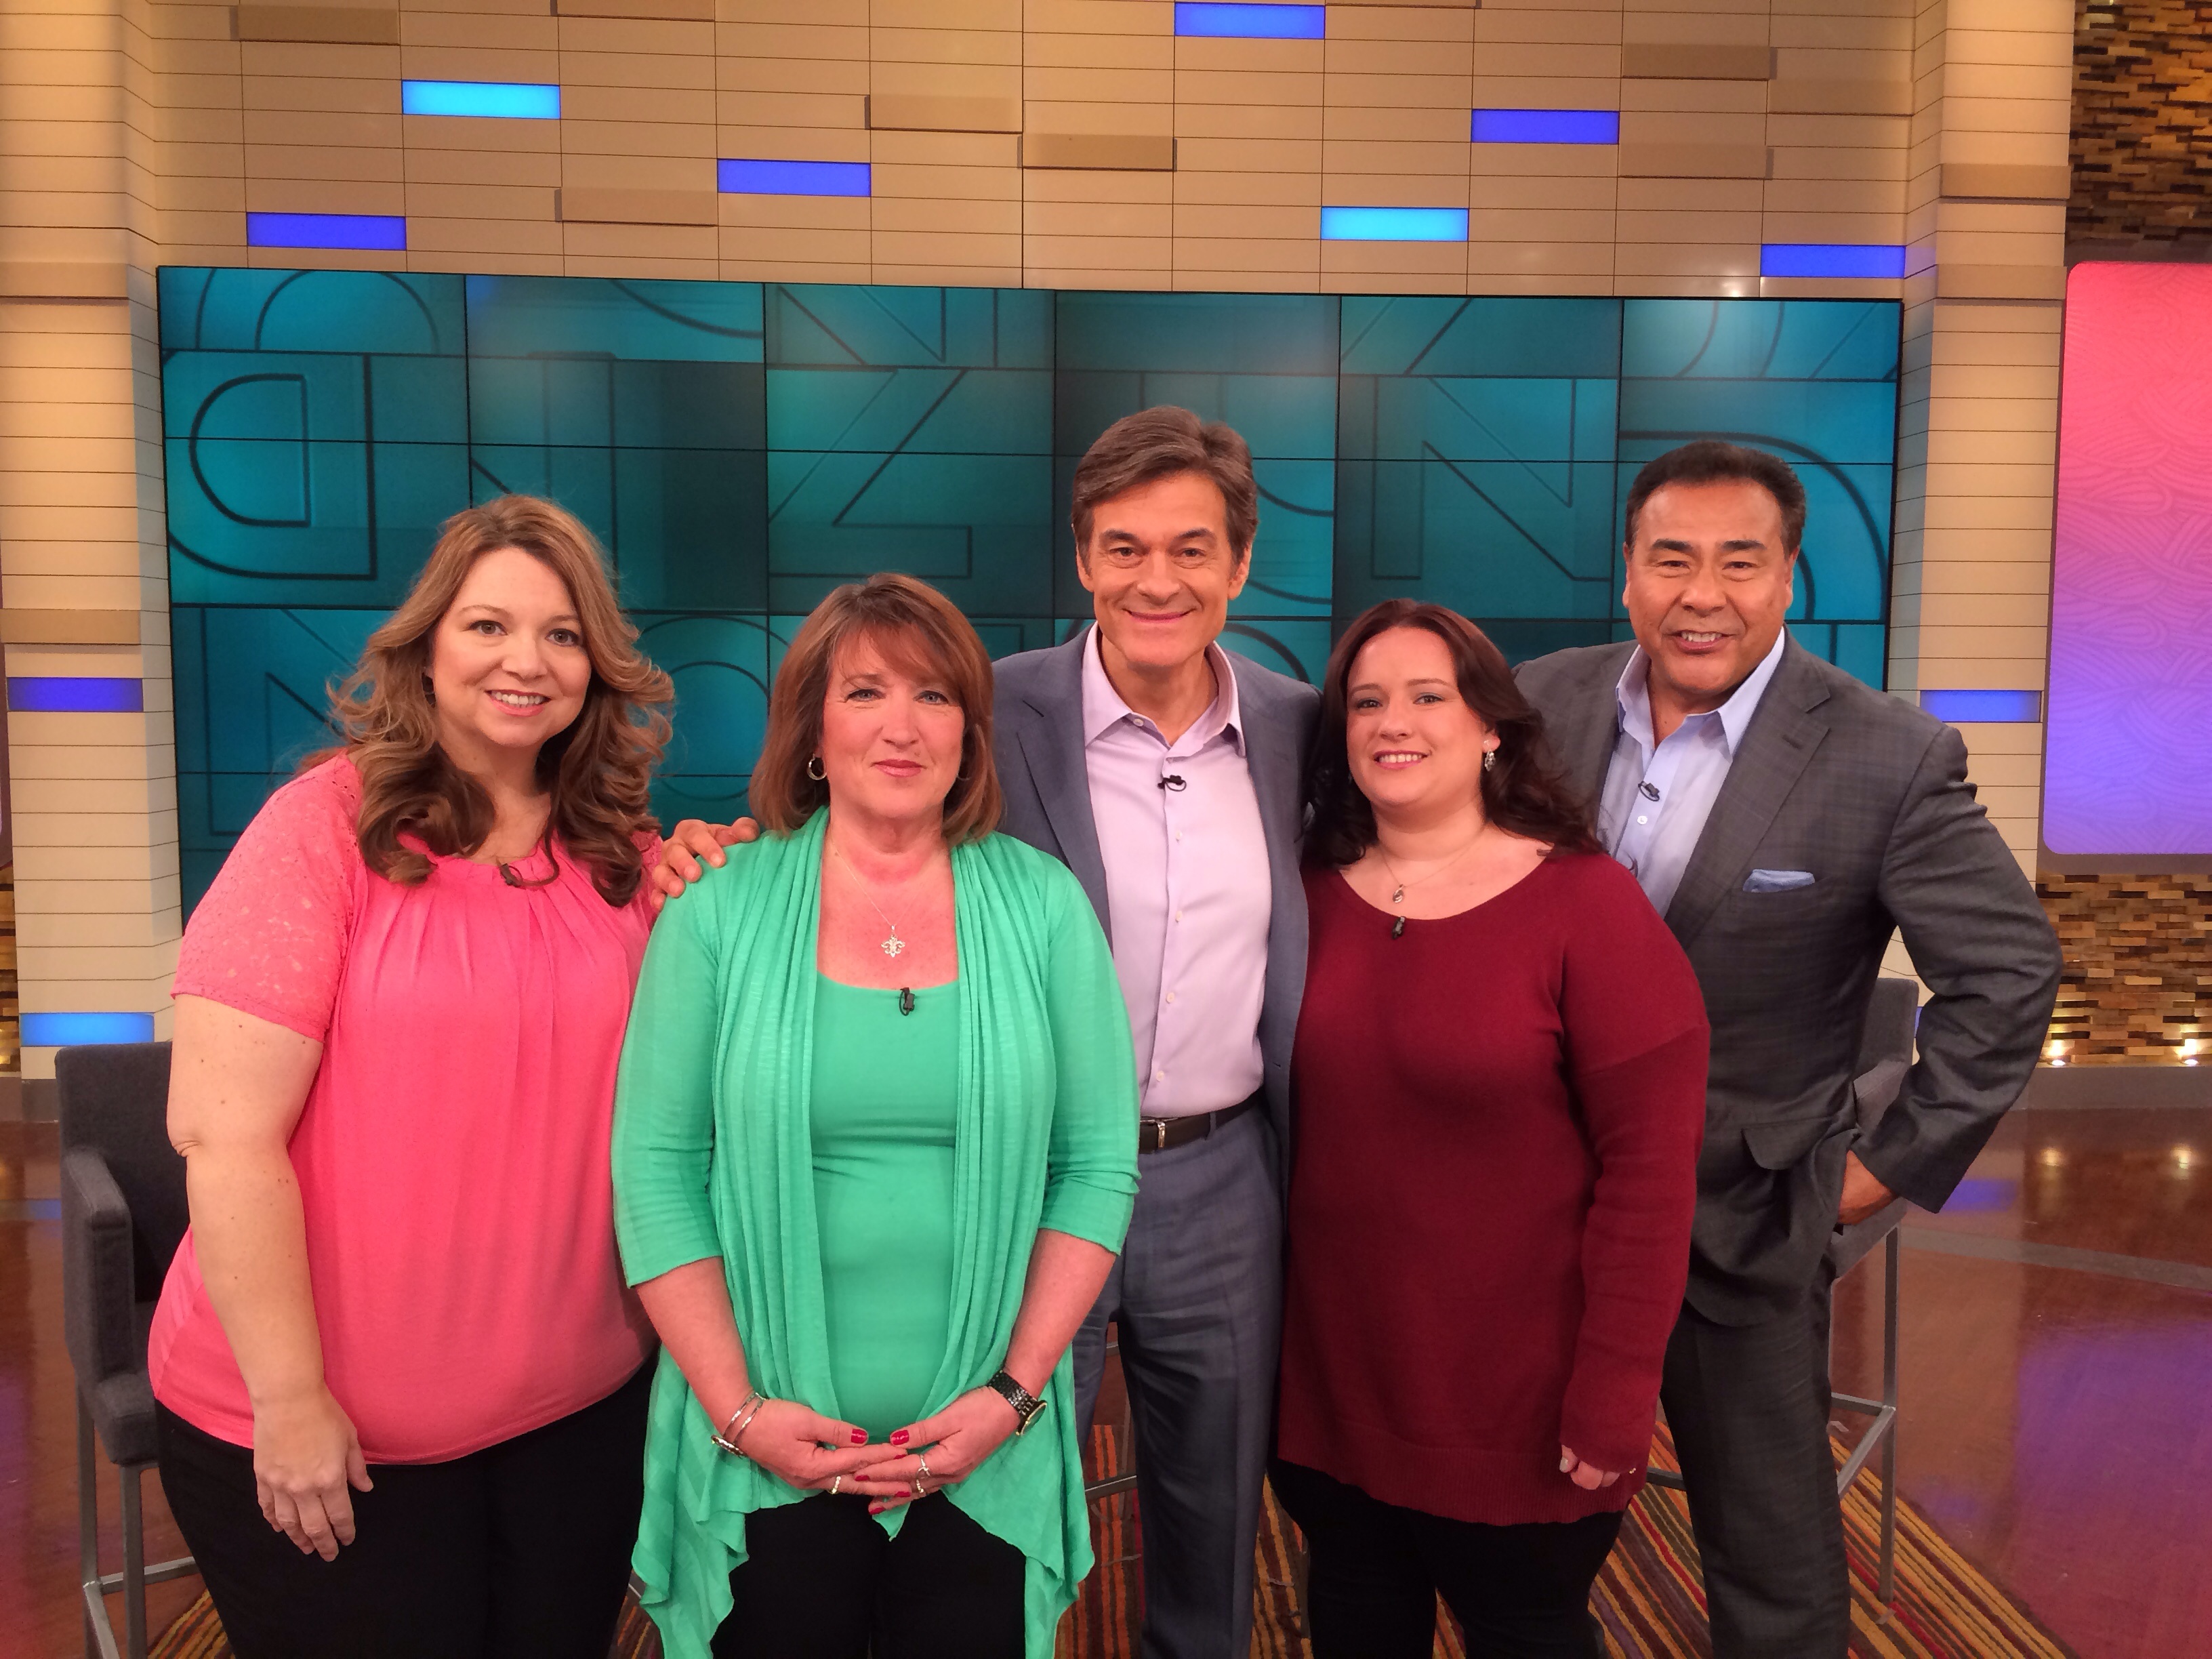 Guest on Dr. Oz: What Would You Do? Health edition. 2015